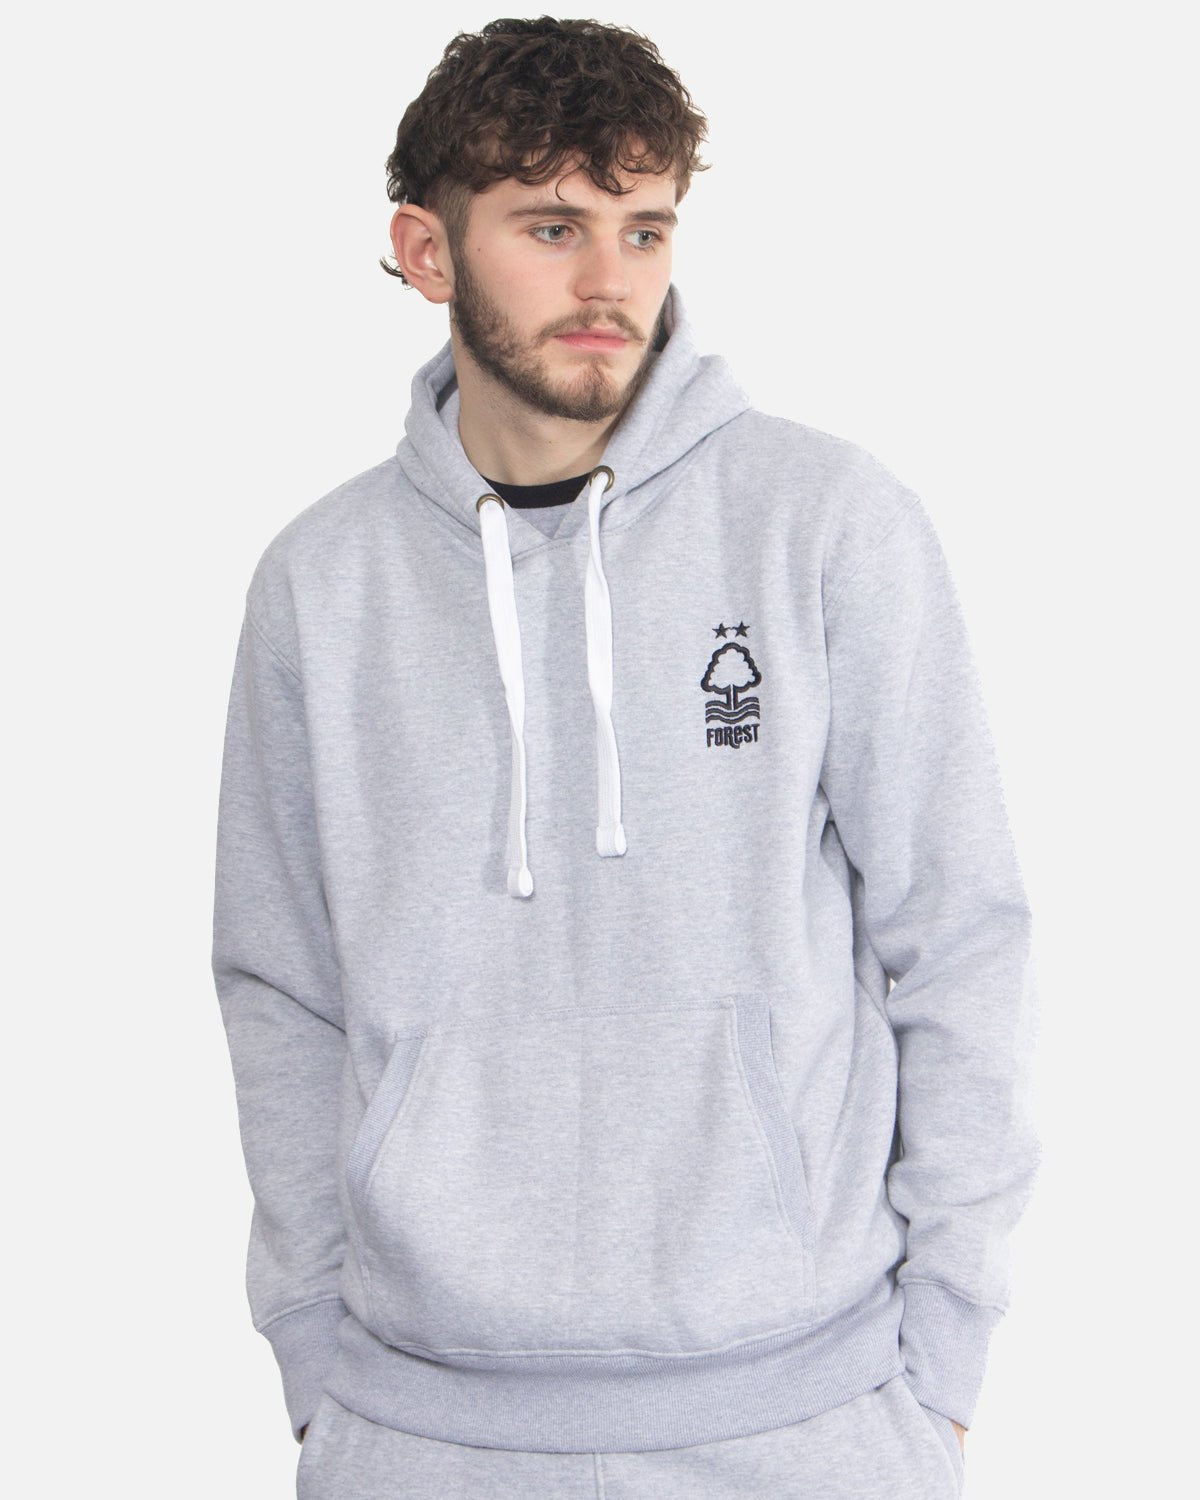 NFFC Adults Grey Marl Overhead Hoodie - Nottingham Forest FC